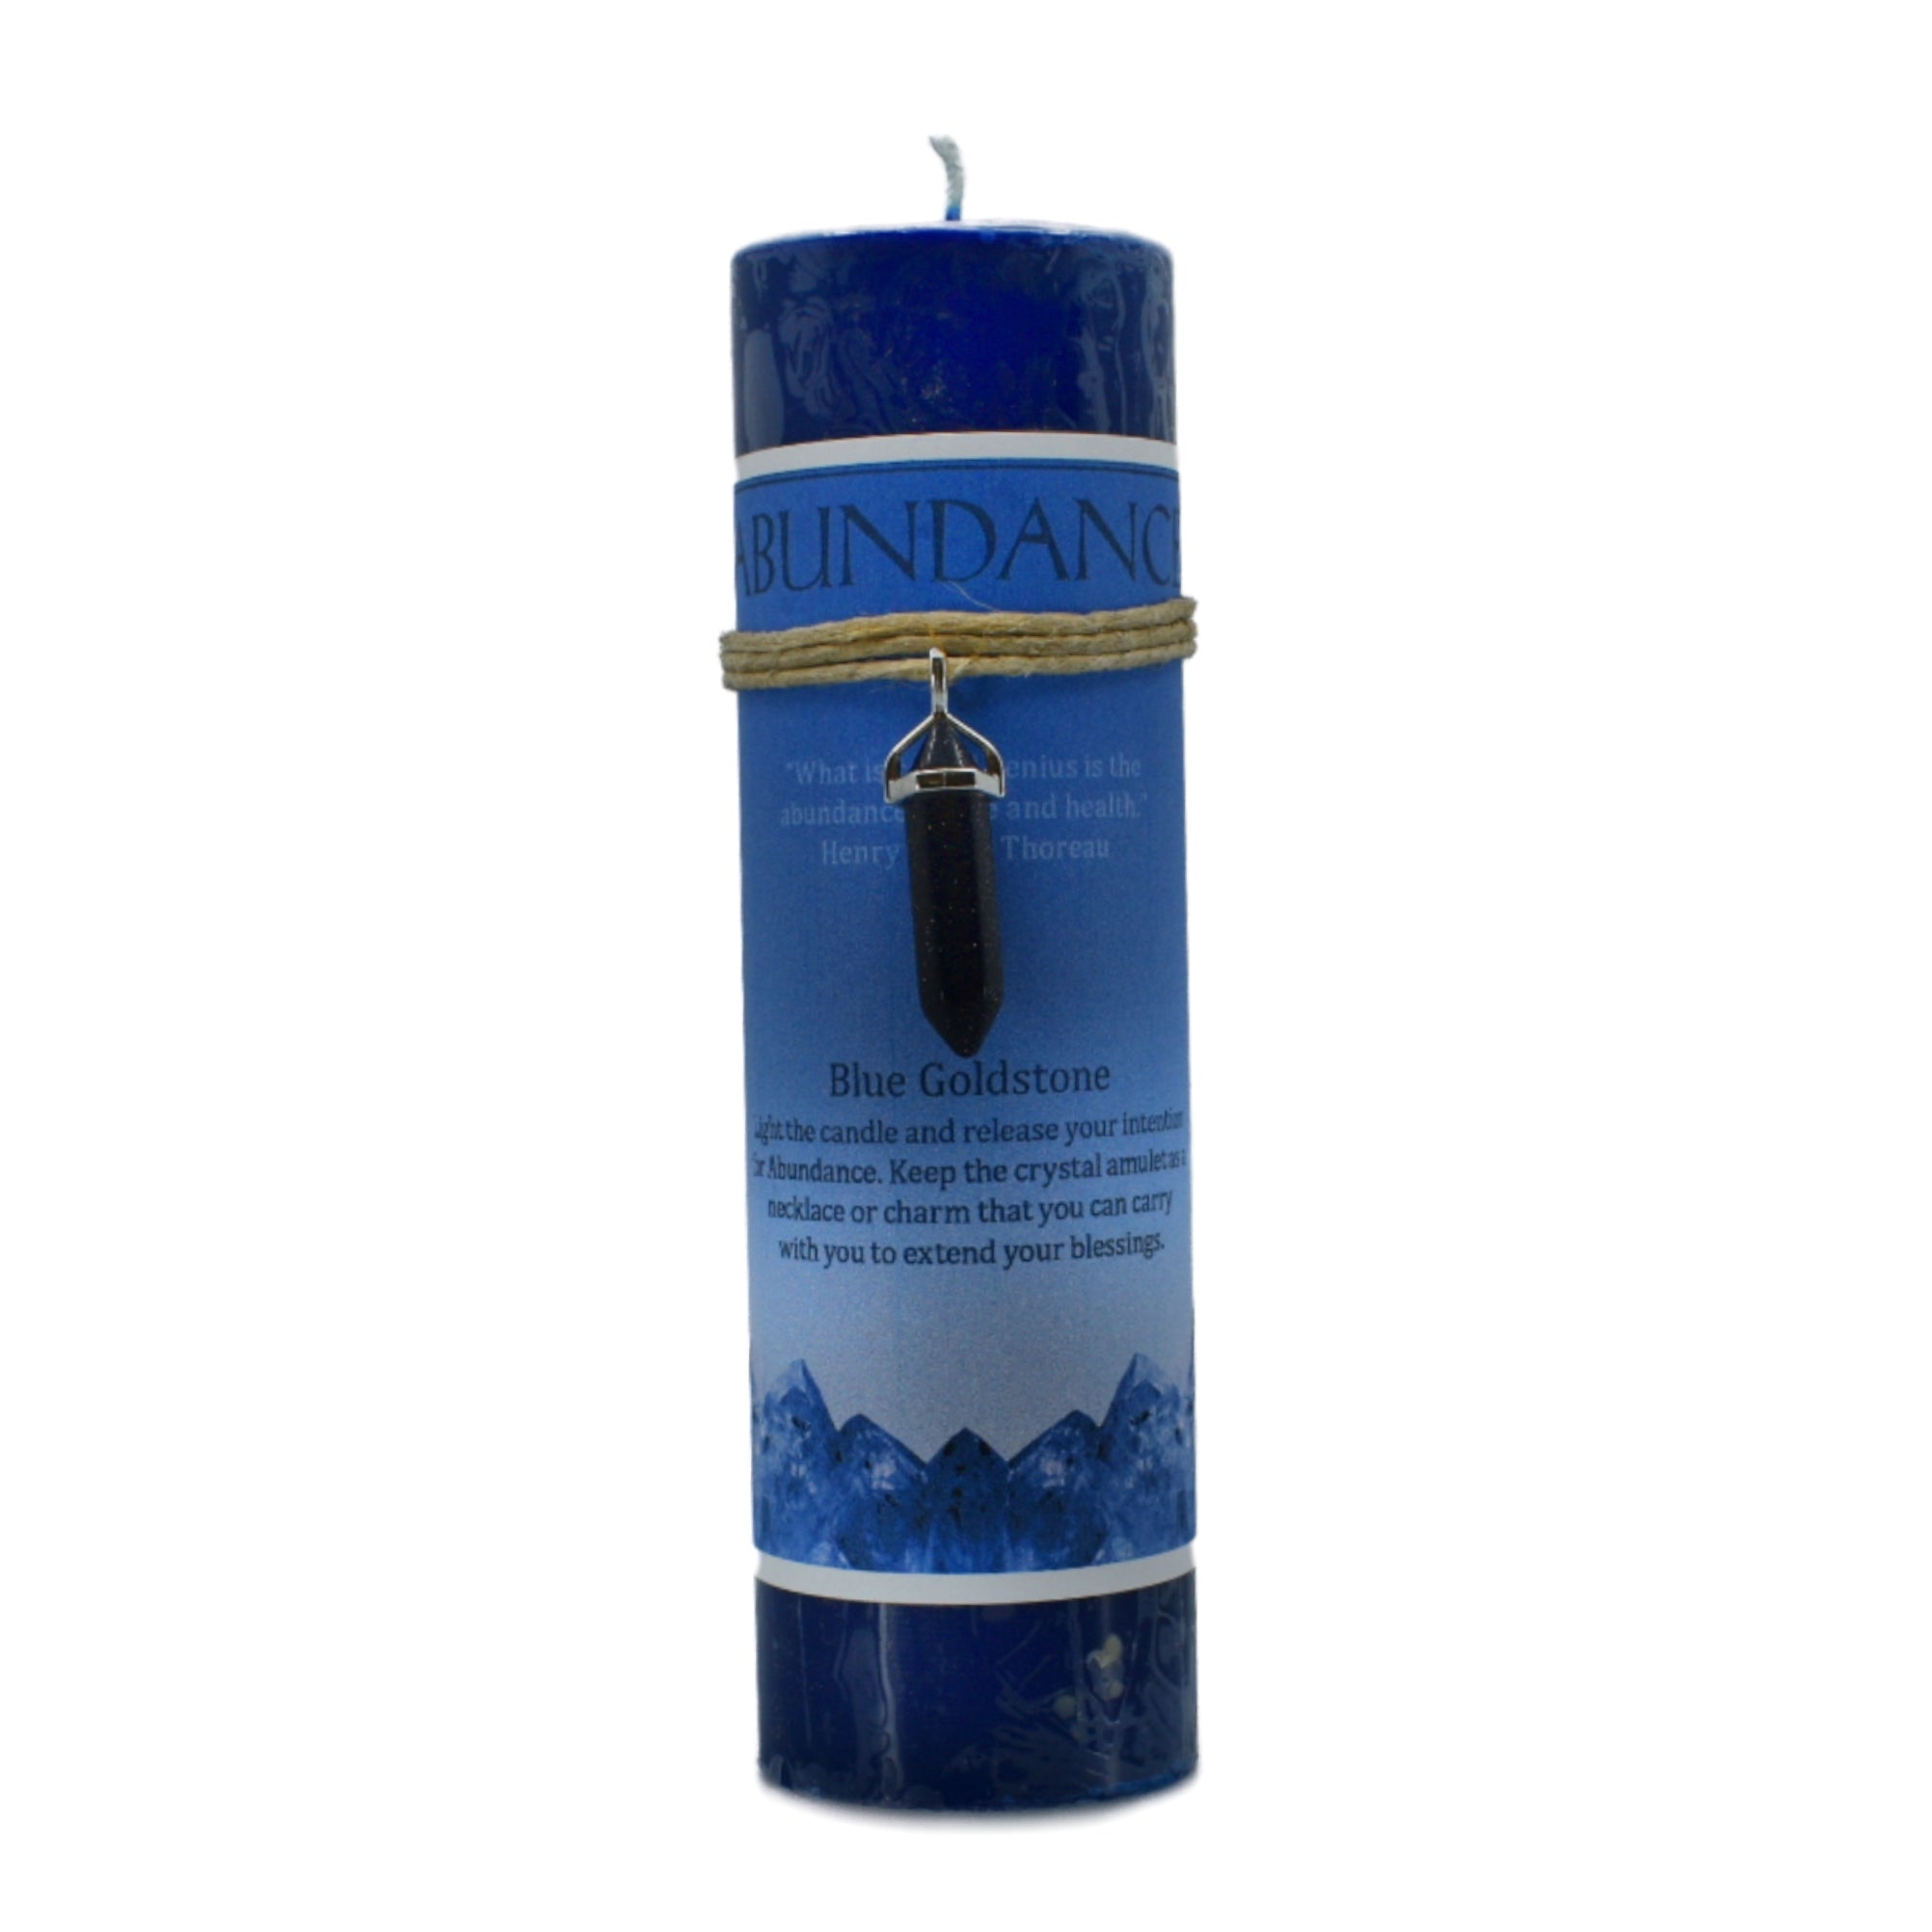 Abundance Crystal Pendant Candle with double pointed blue goldstone crystal.  Fresh rain scented blue candle.  Use this candle for abundance.